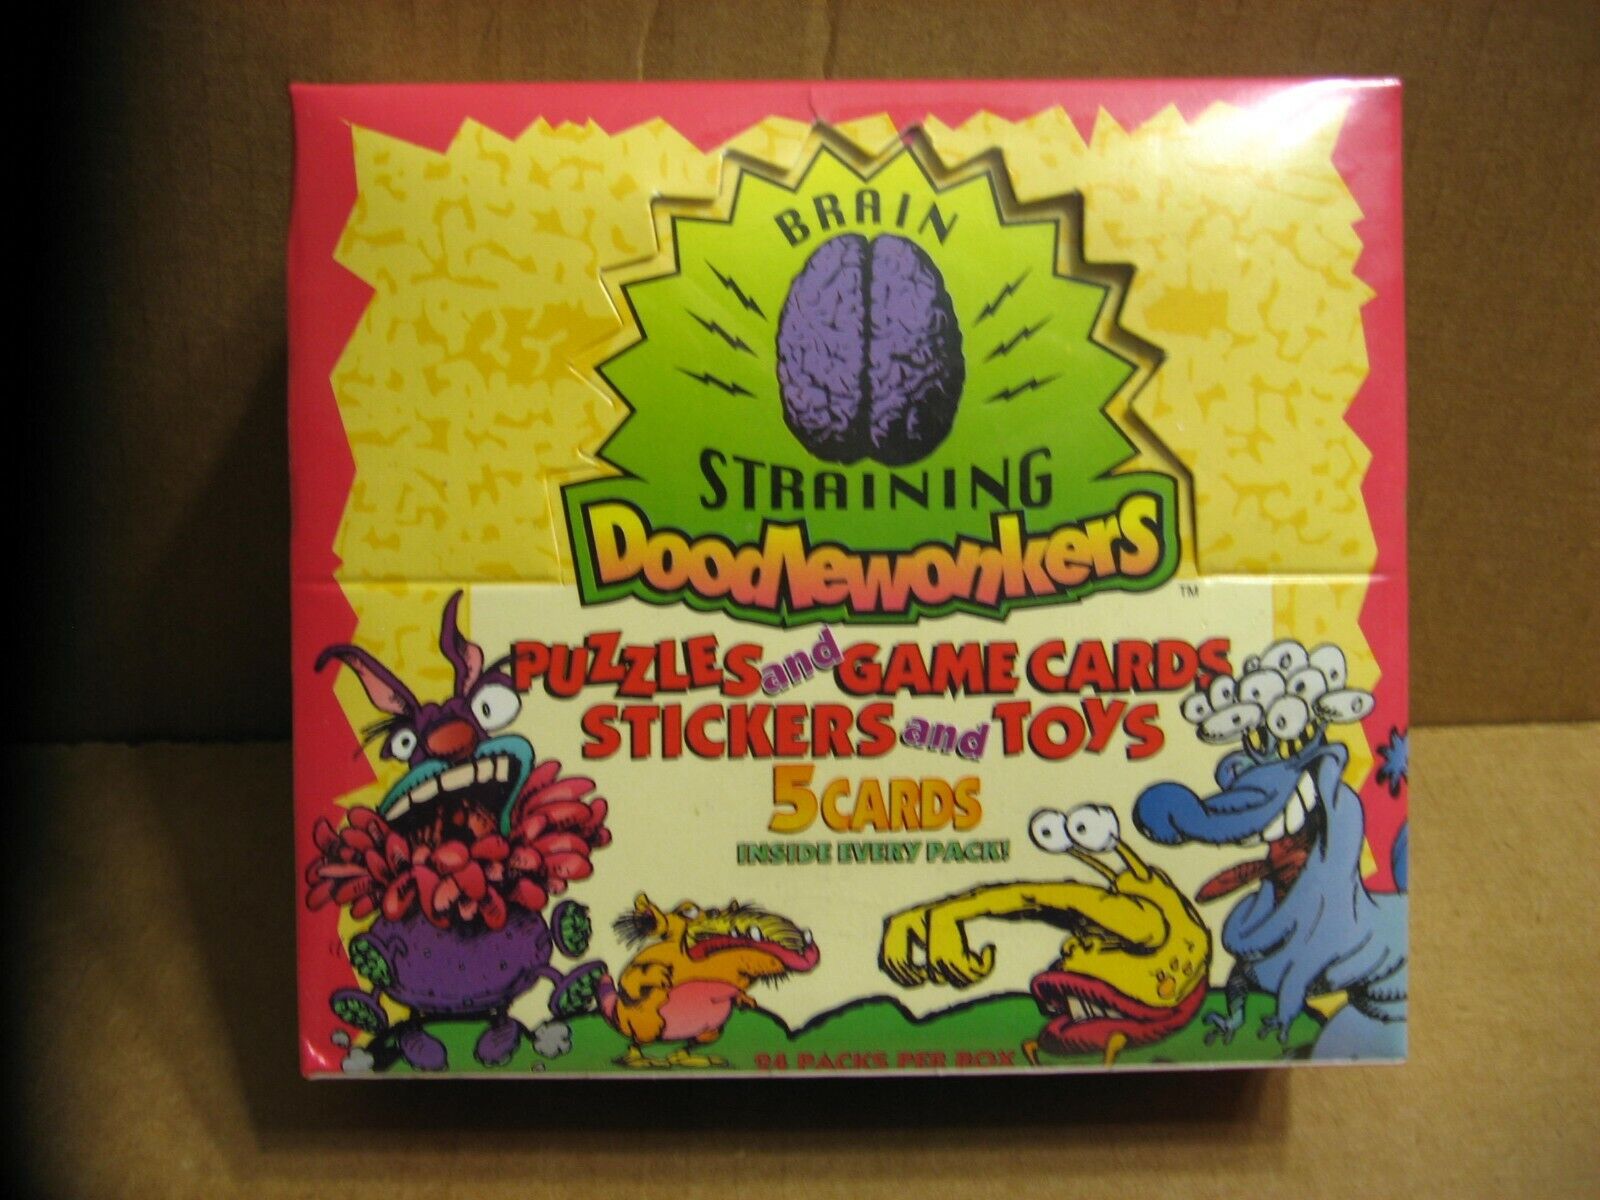 1996 Brain Straining Doodlewonkers Trading Card Box Packs Puzzles Games Stickers